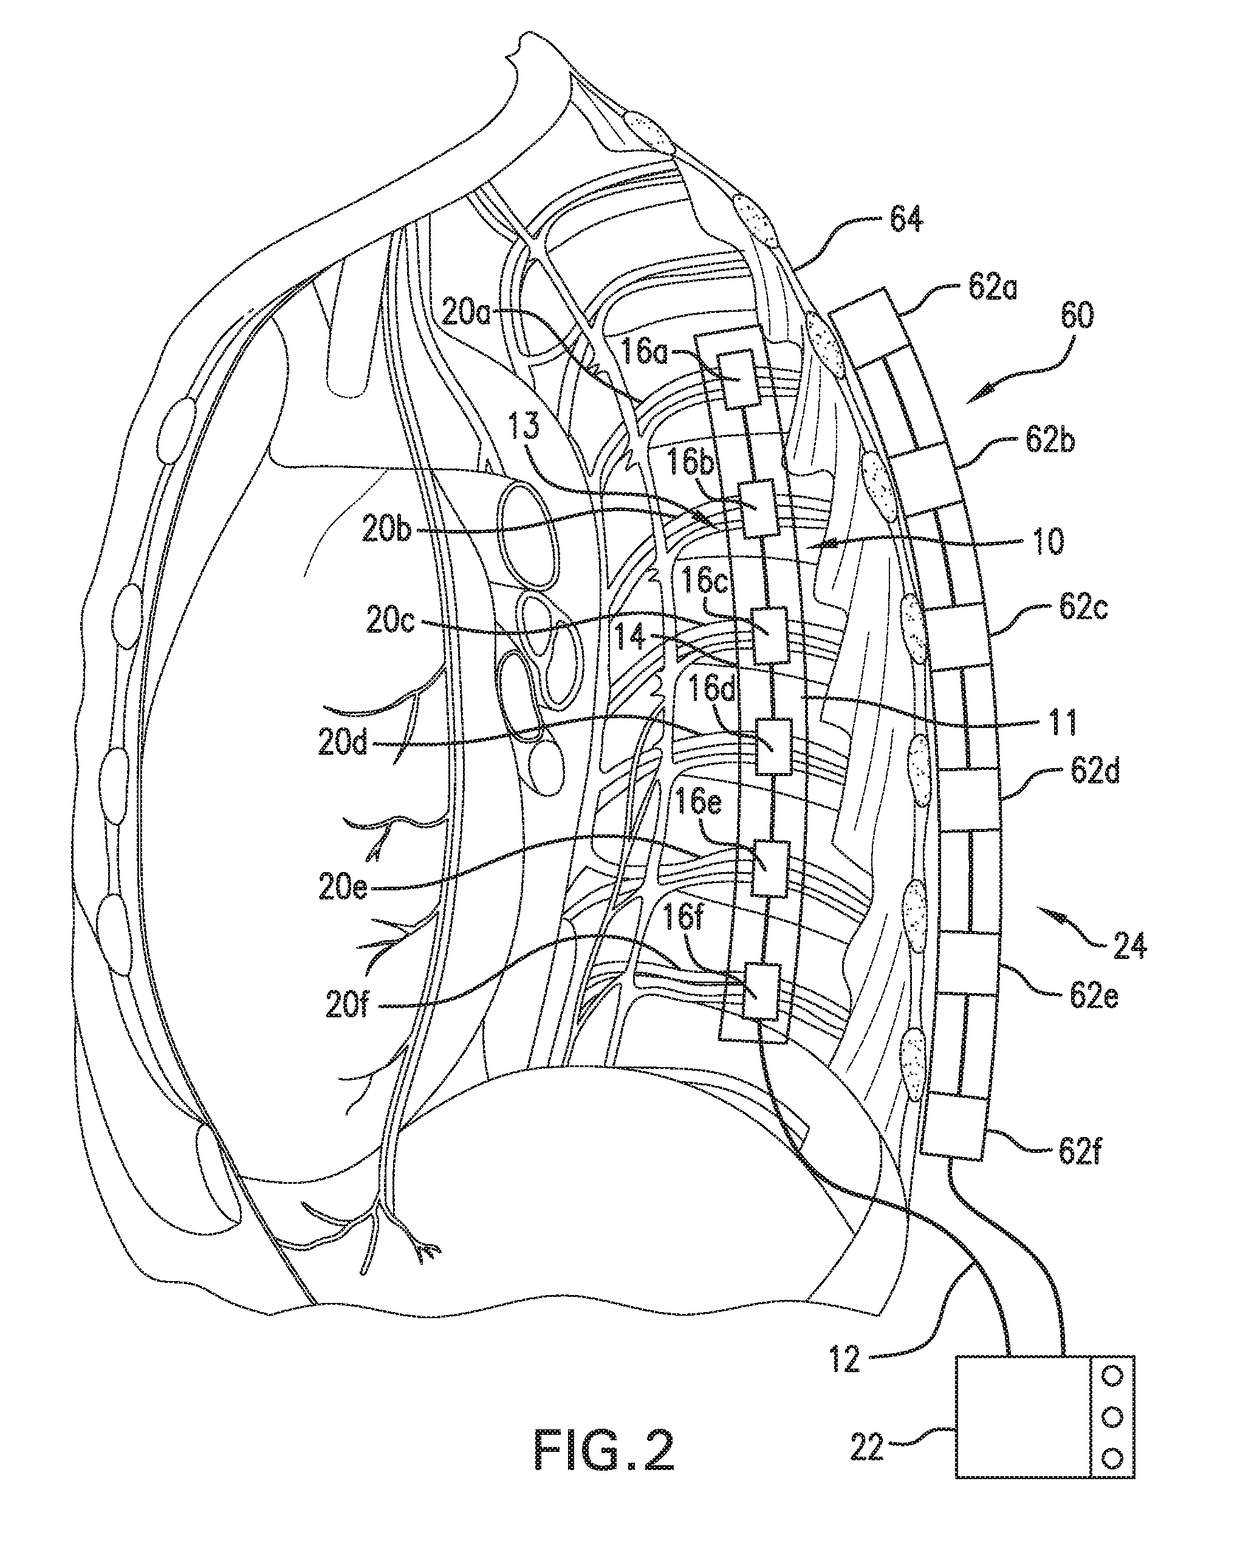 Implantable temporary nerve conduction blocking method and system